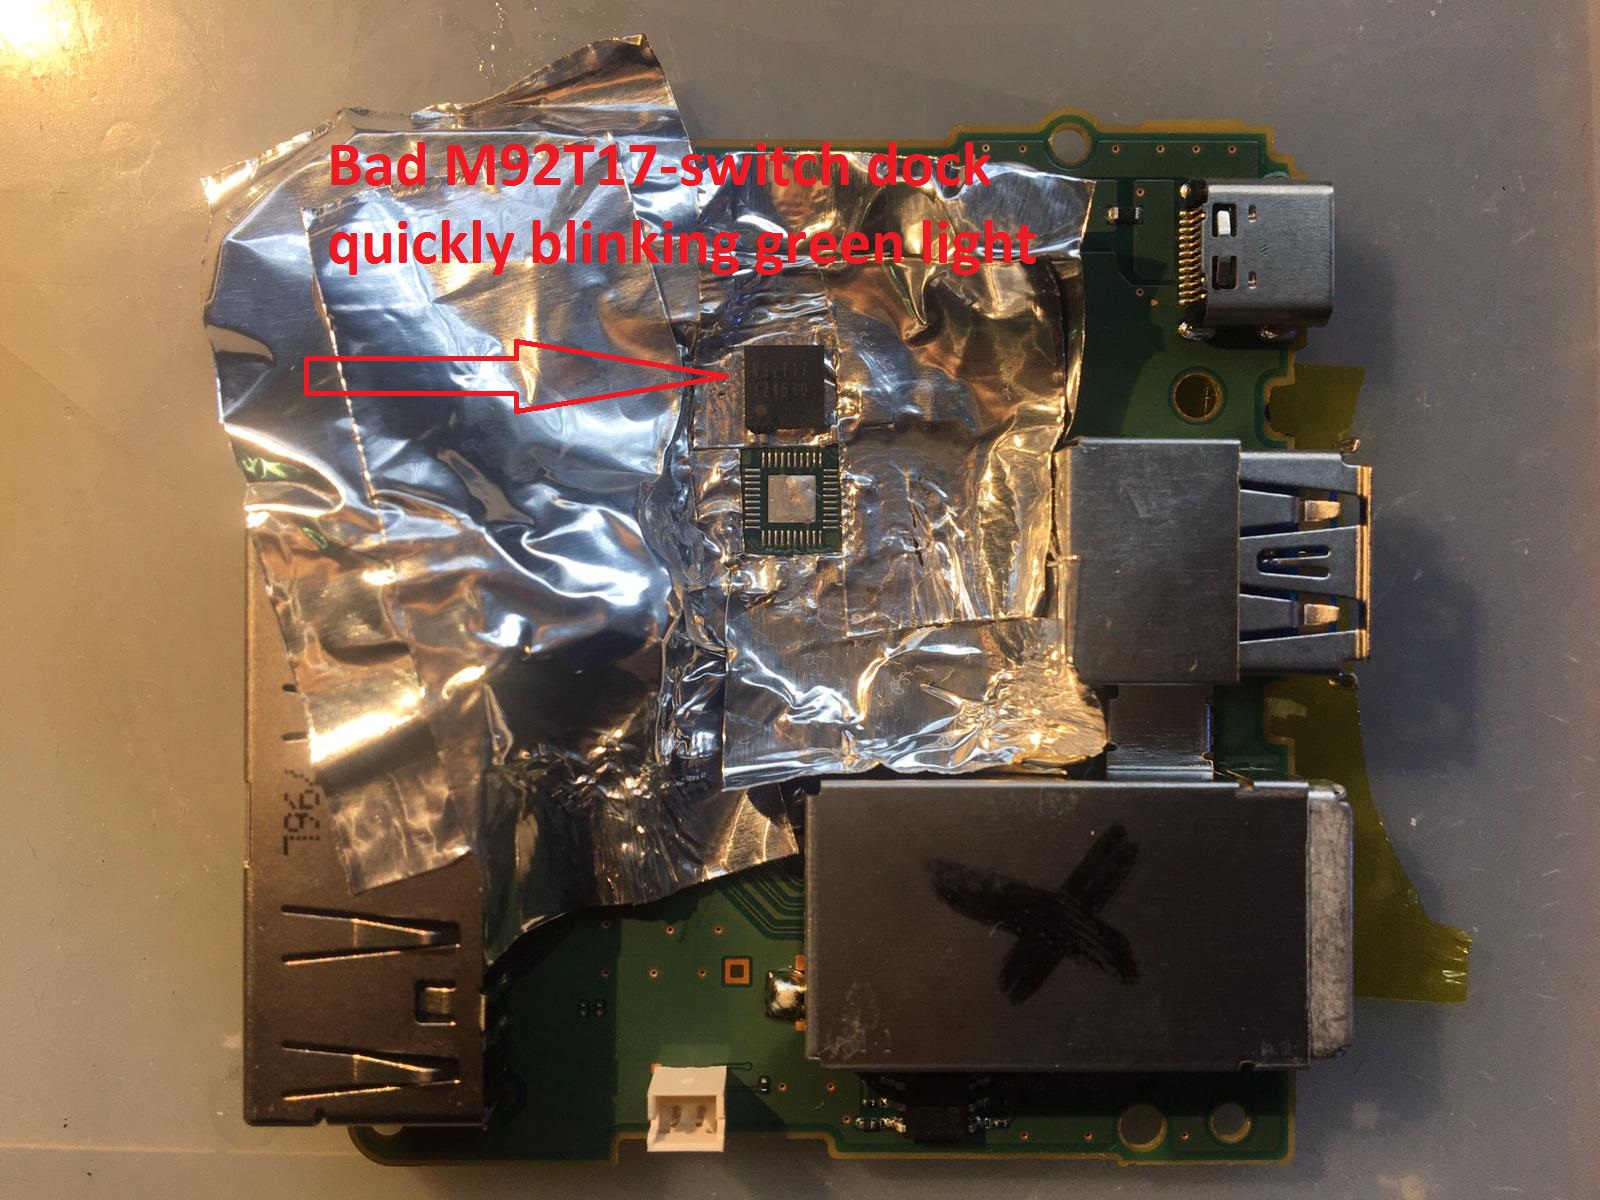 Nintendo Switch dock flashing green light - M92T55 or M92T17 Chip is the  problem? | GBAtemp.net - The Independent Video Game Community